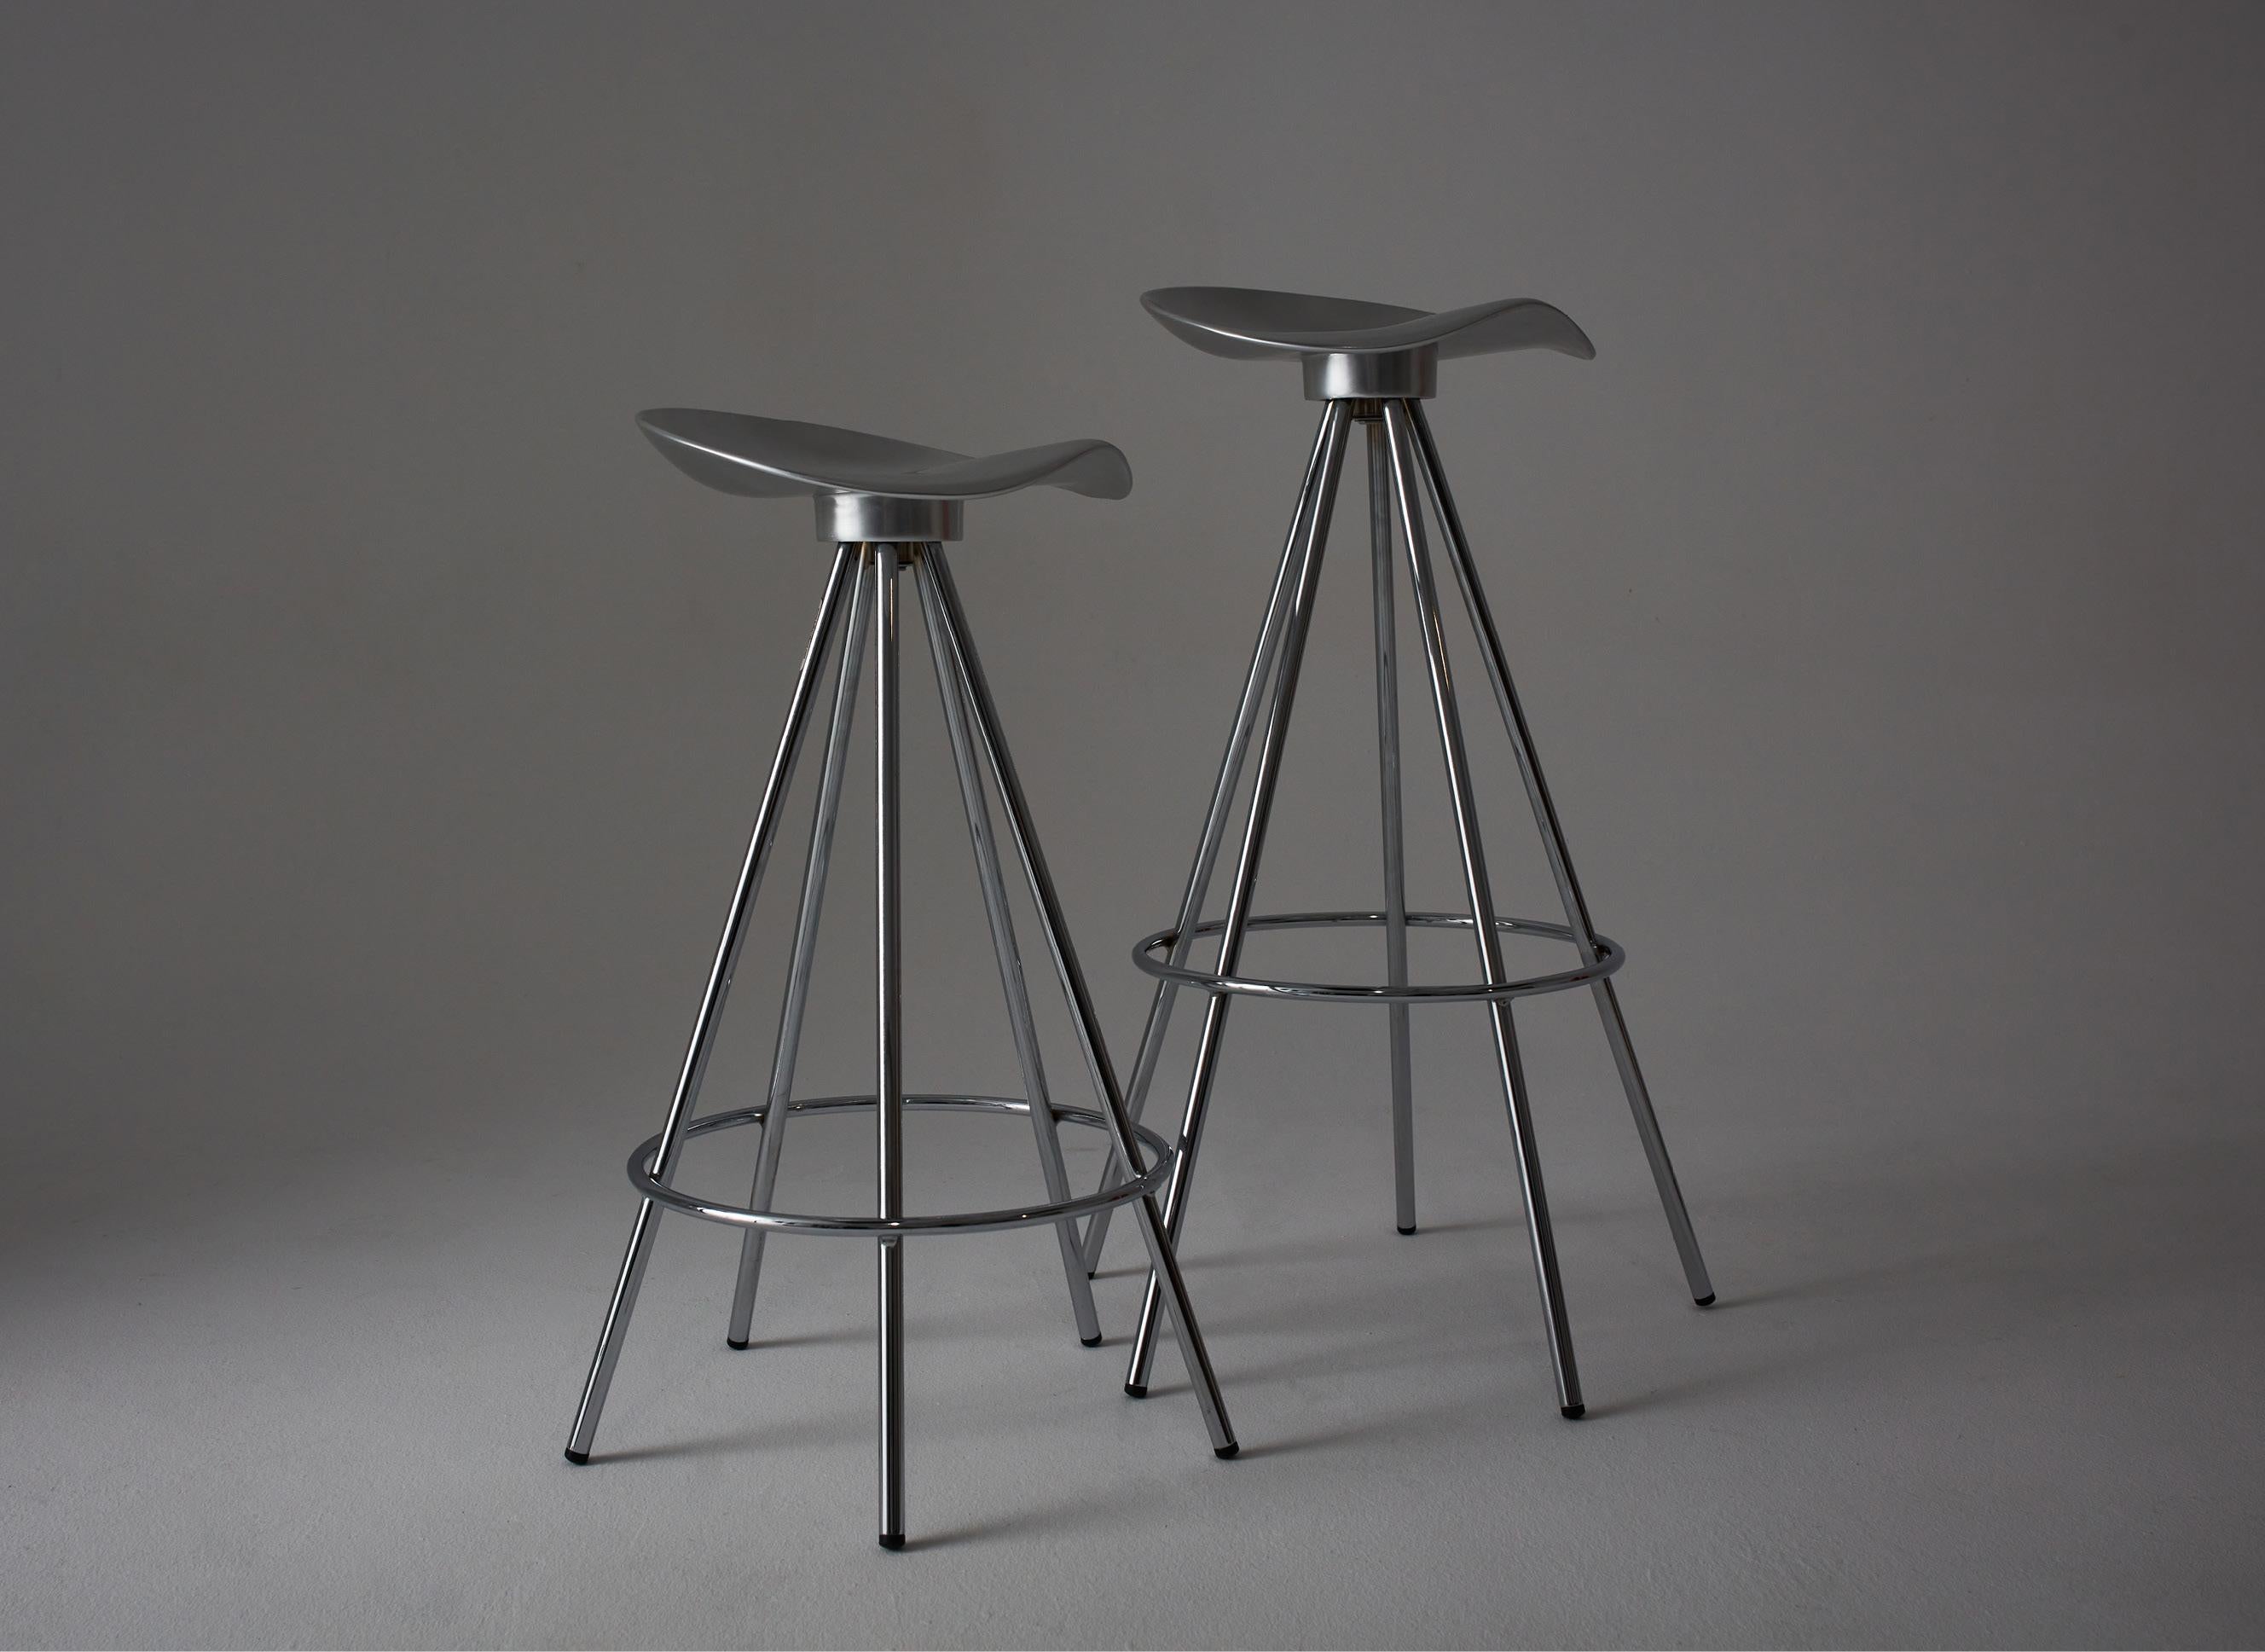 Spanish Set of 3 High Jamaica Bar Stool Aluminium Seat and Chromed Steel by Pepe Cortés For Sale